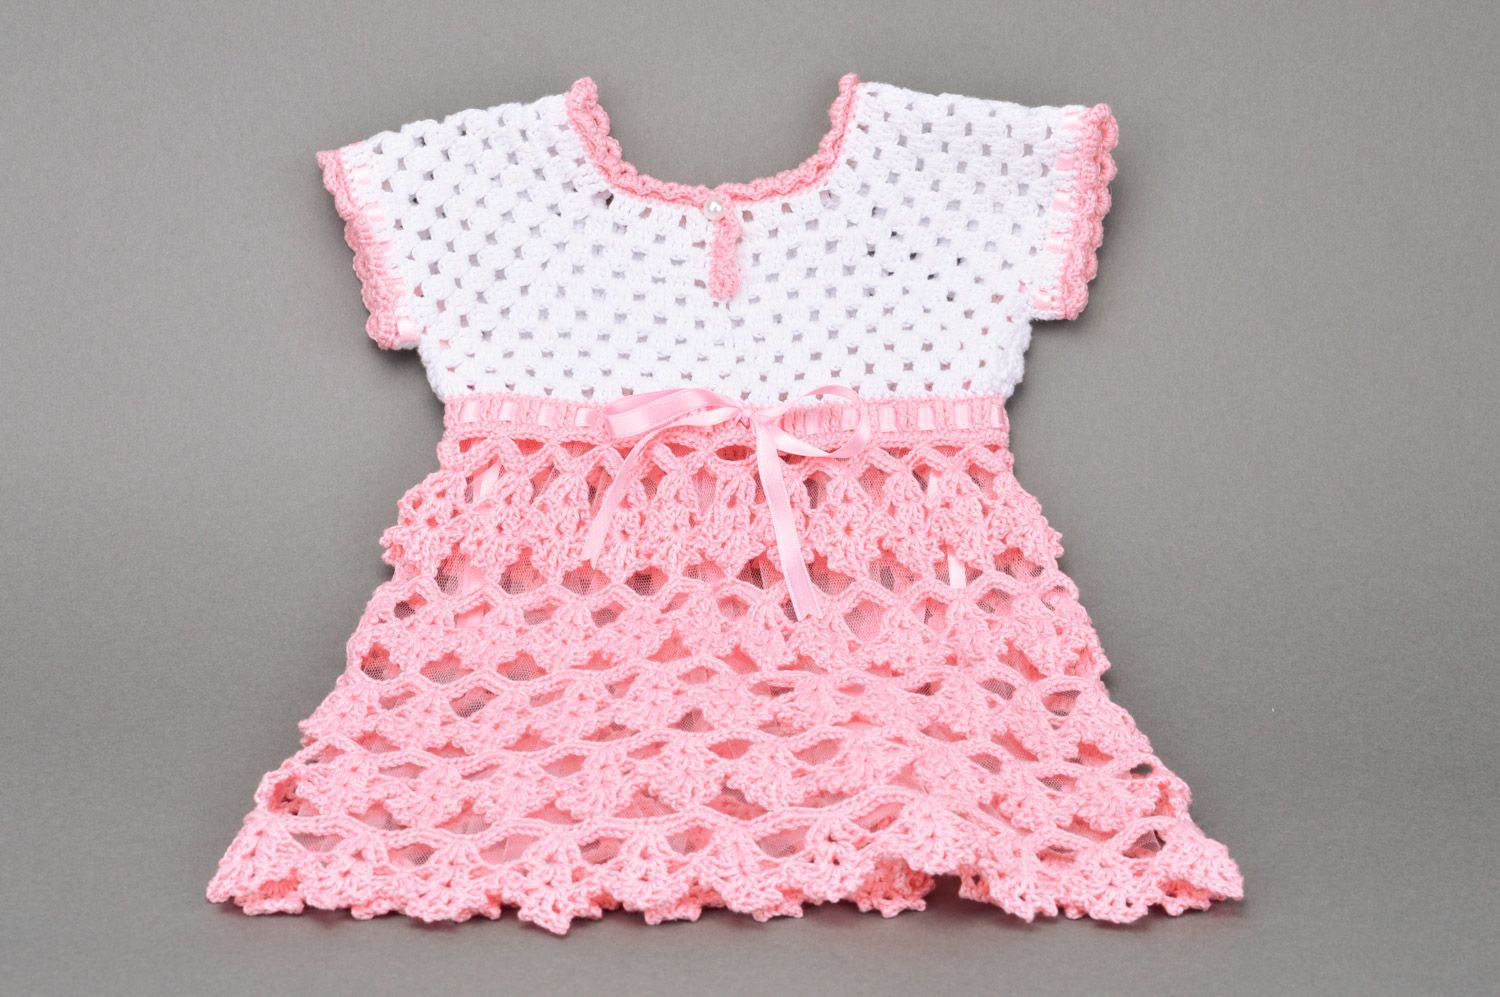 Handmade crocheted baby dress made of cotton in pink color photo 2